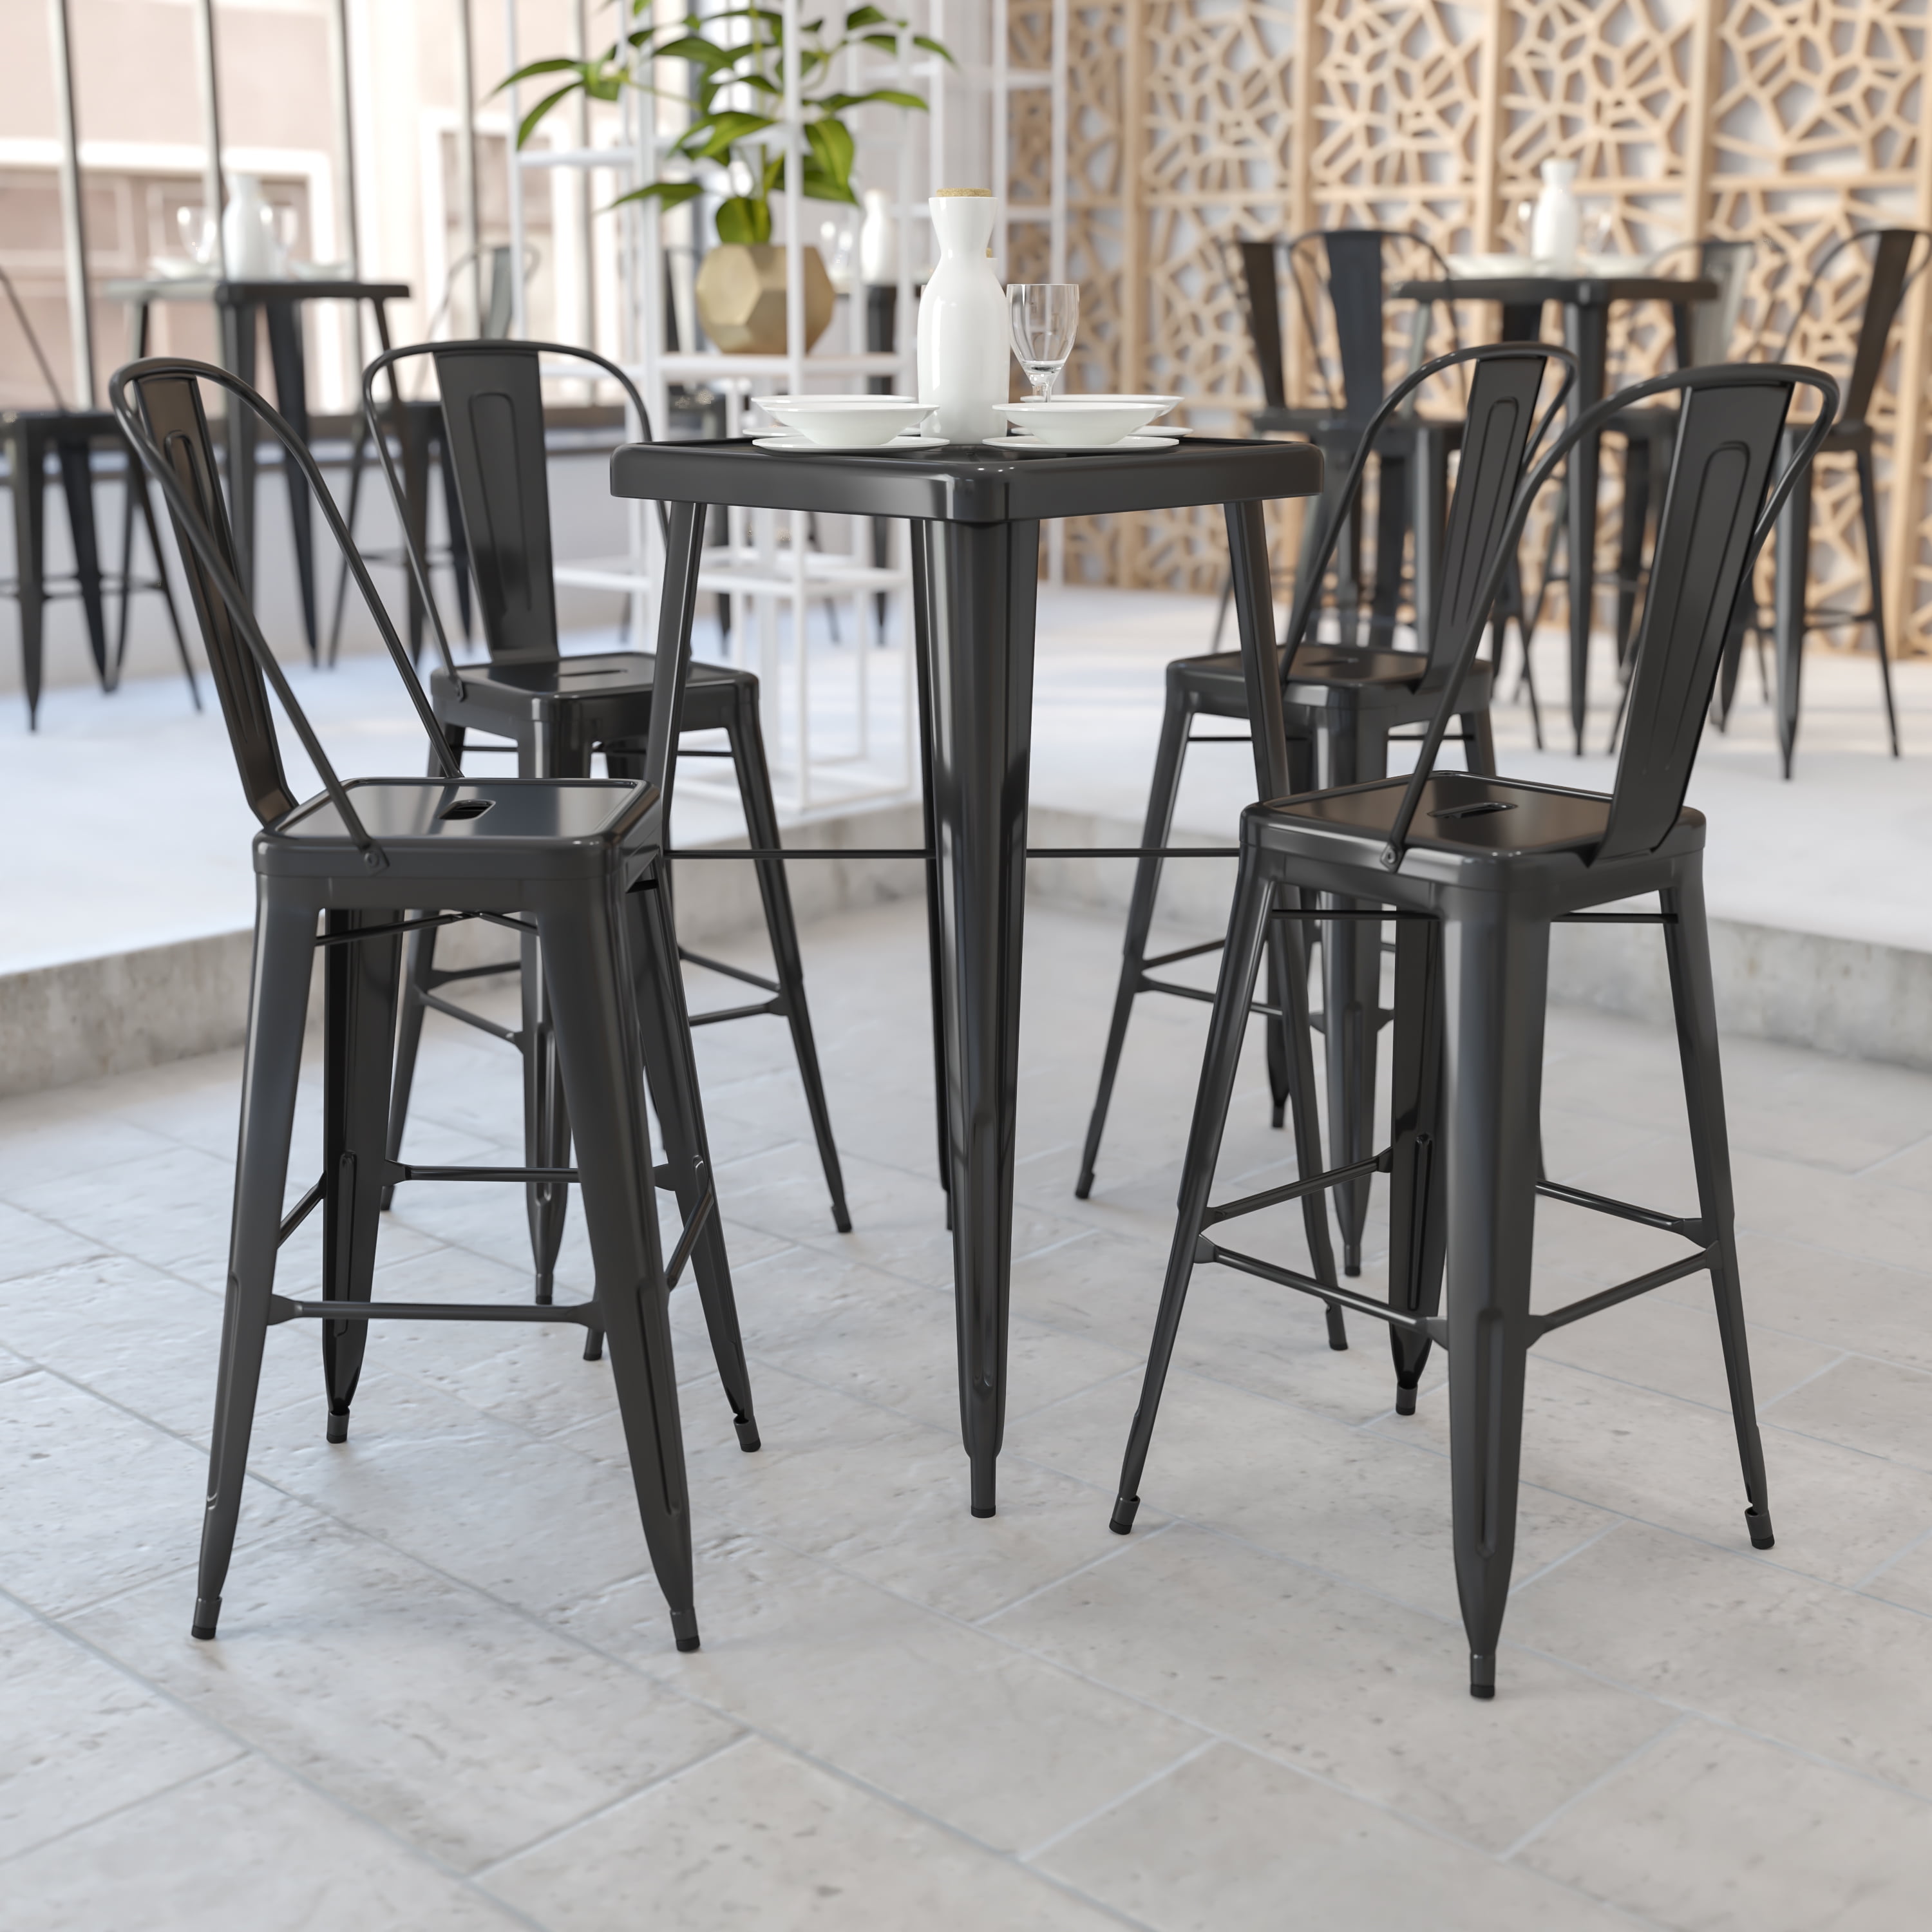 23.75'' Square Indoor-Outdoor Restaurant Table Set with 2 Black Rattan Chairs 